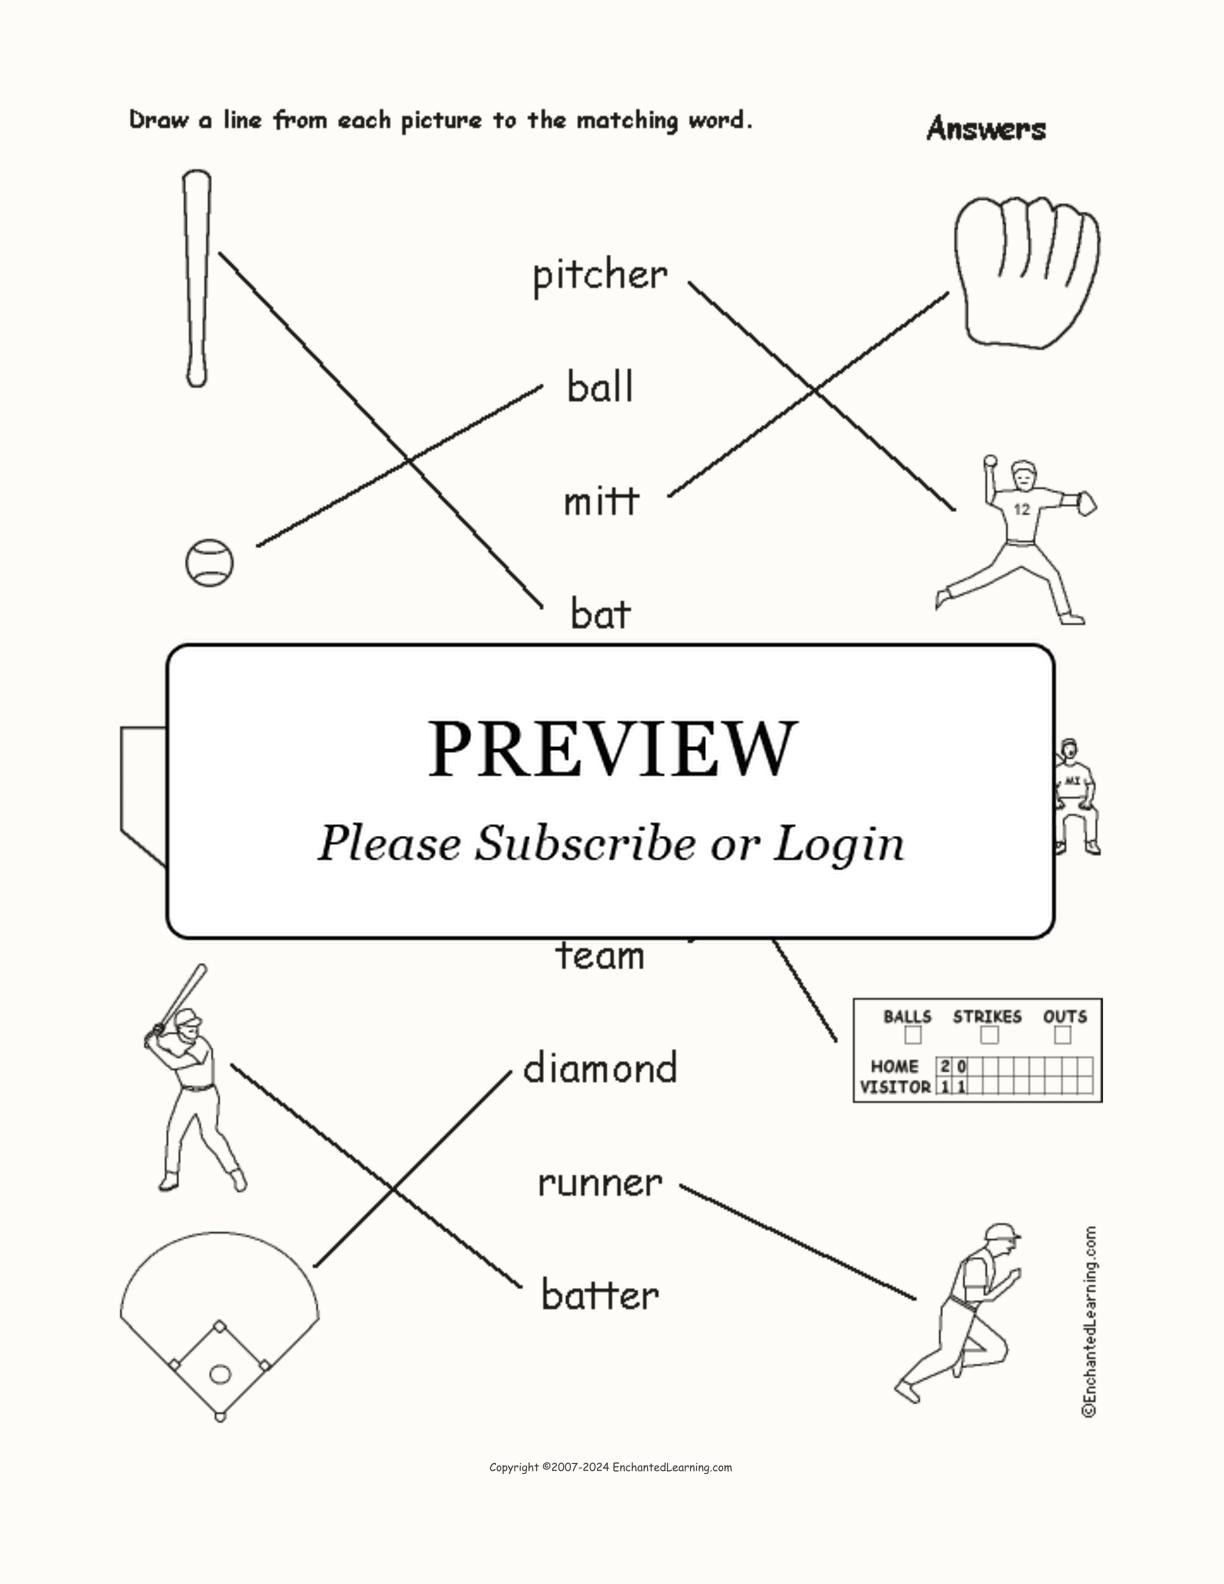 Baseball - Match the Words to the Pictures interactive worksheet page 2